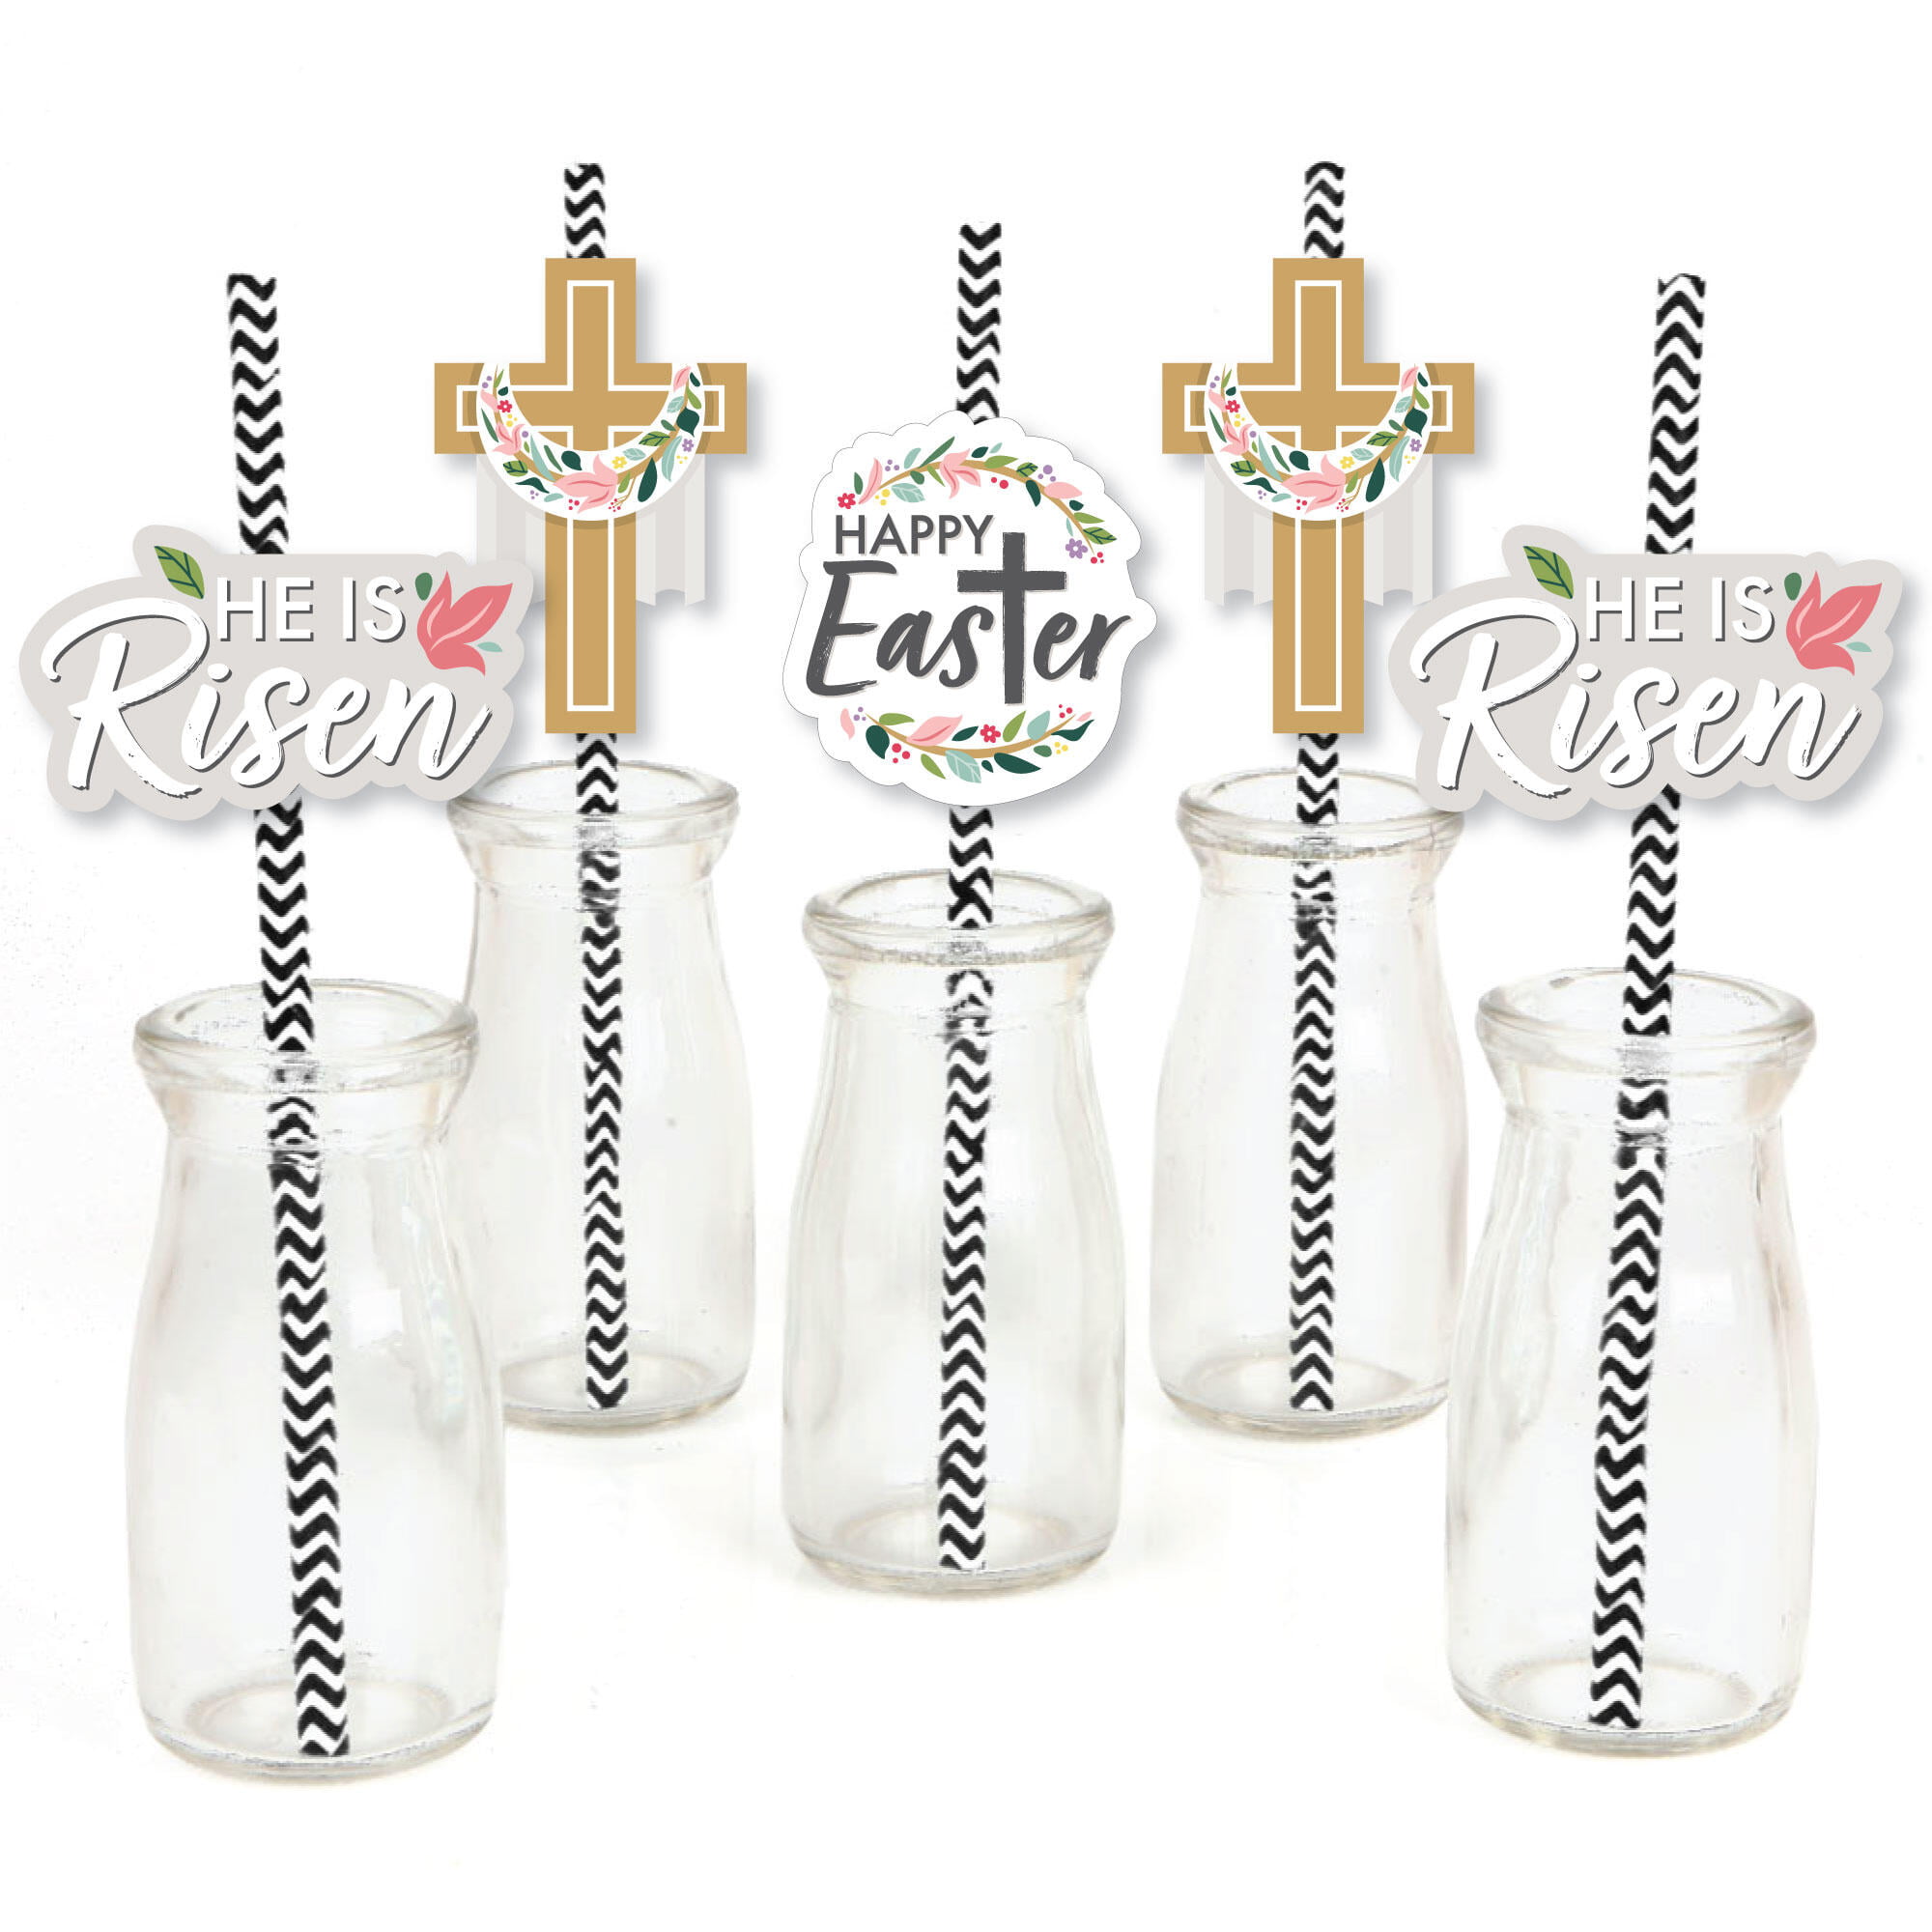 Details about   Happy Easter Paper Straws Set of 2 packs 